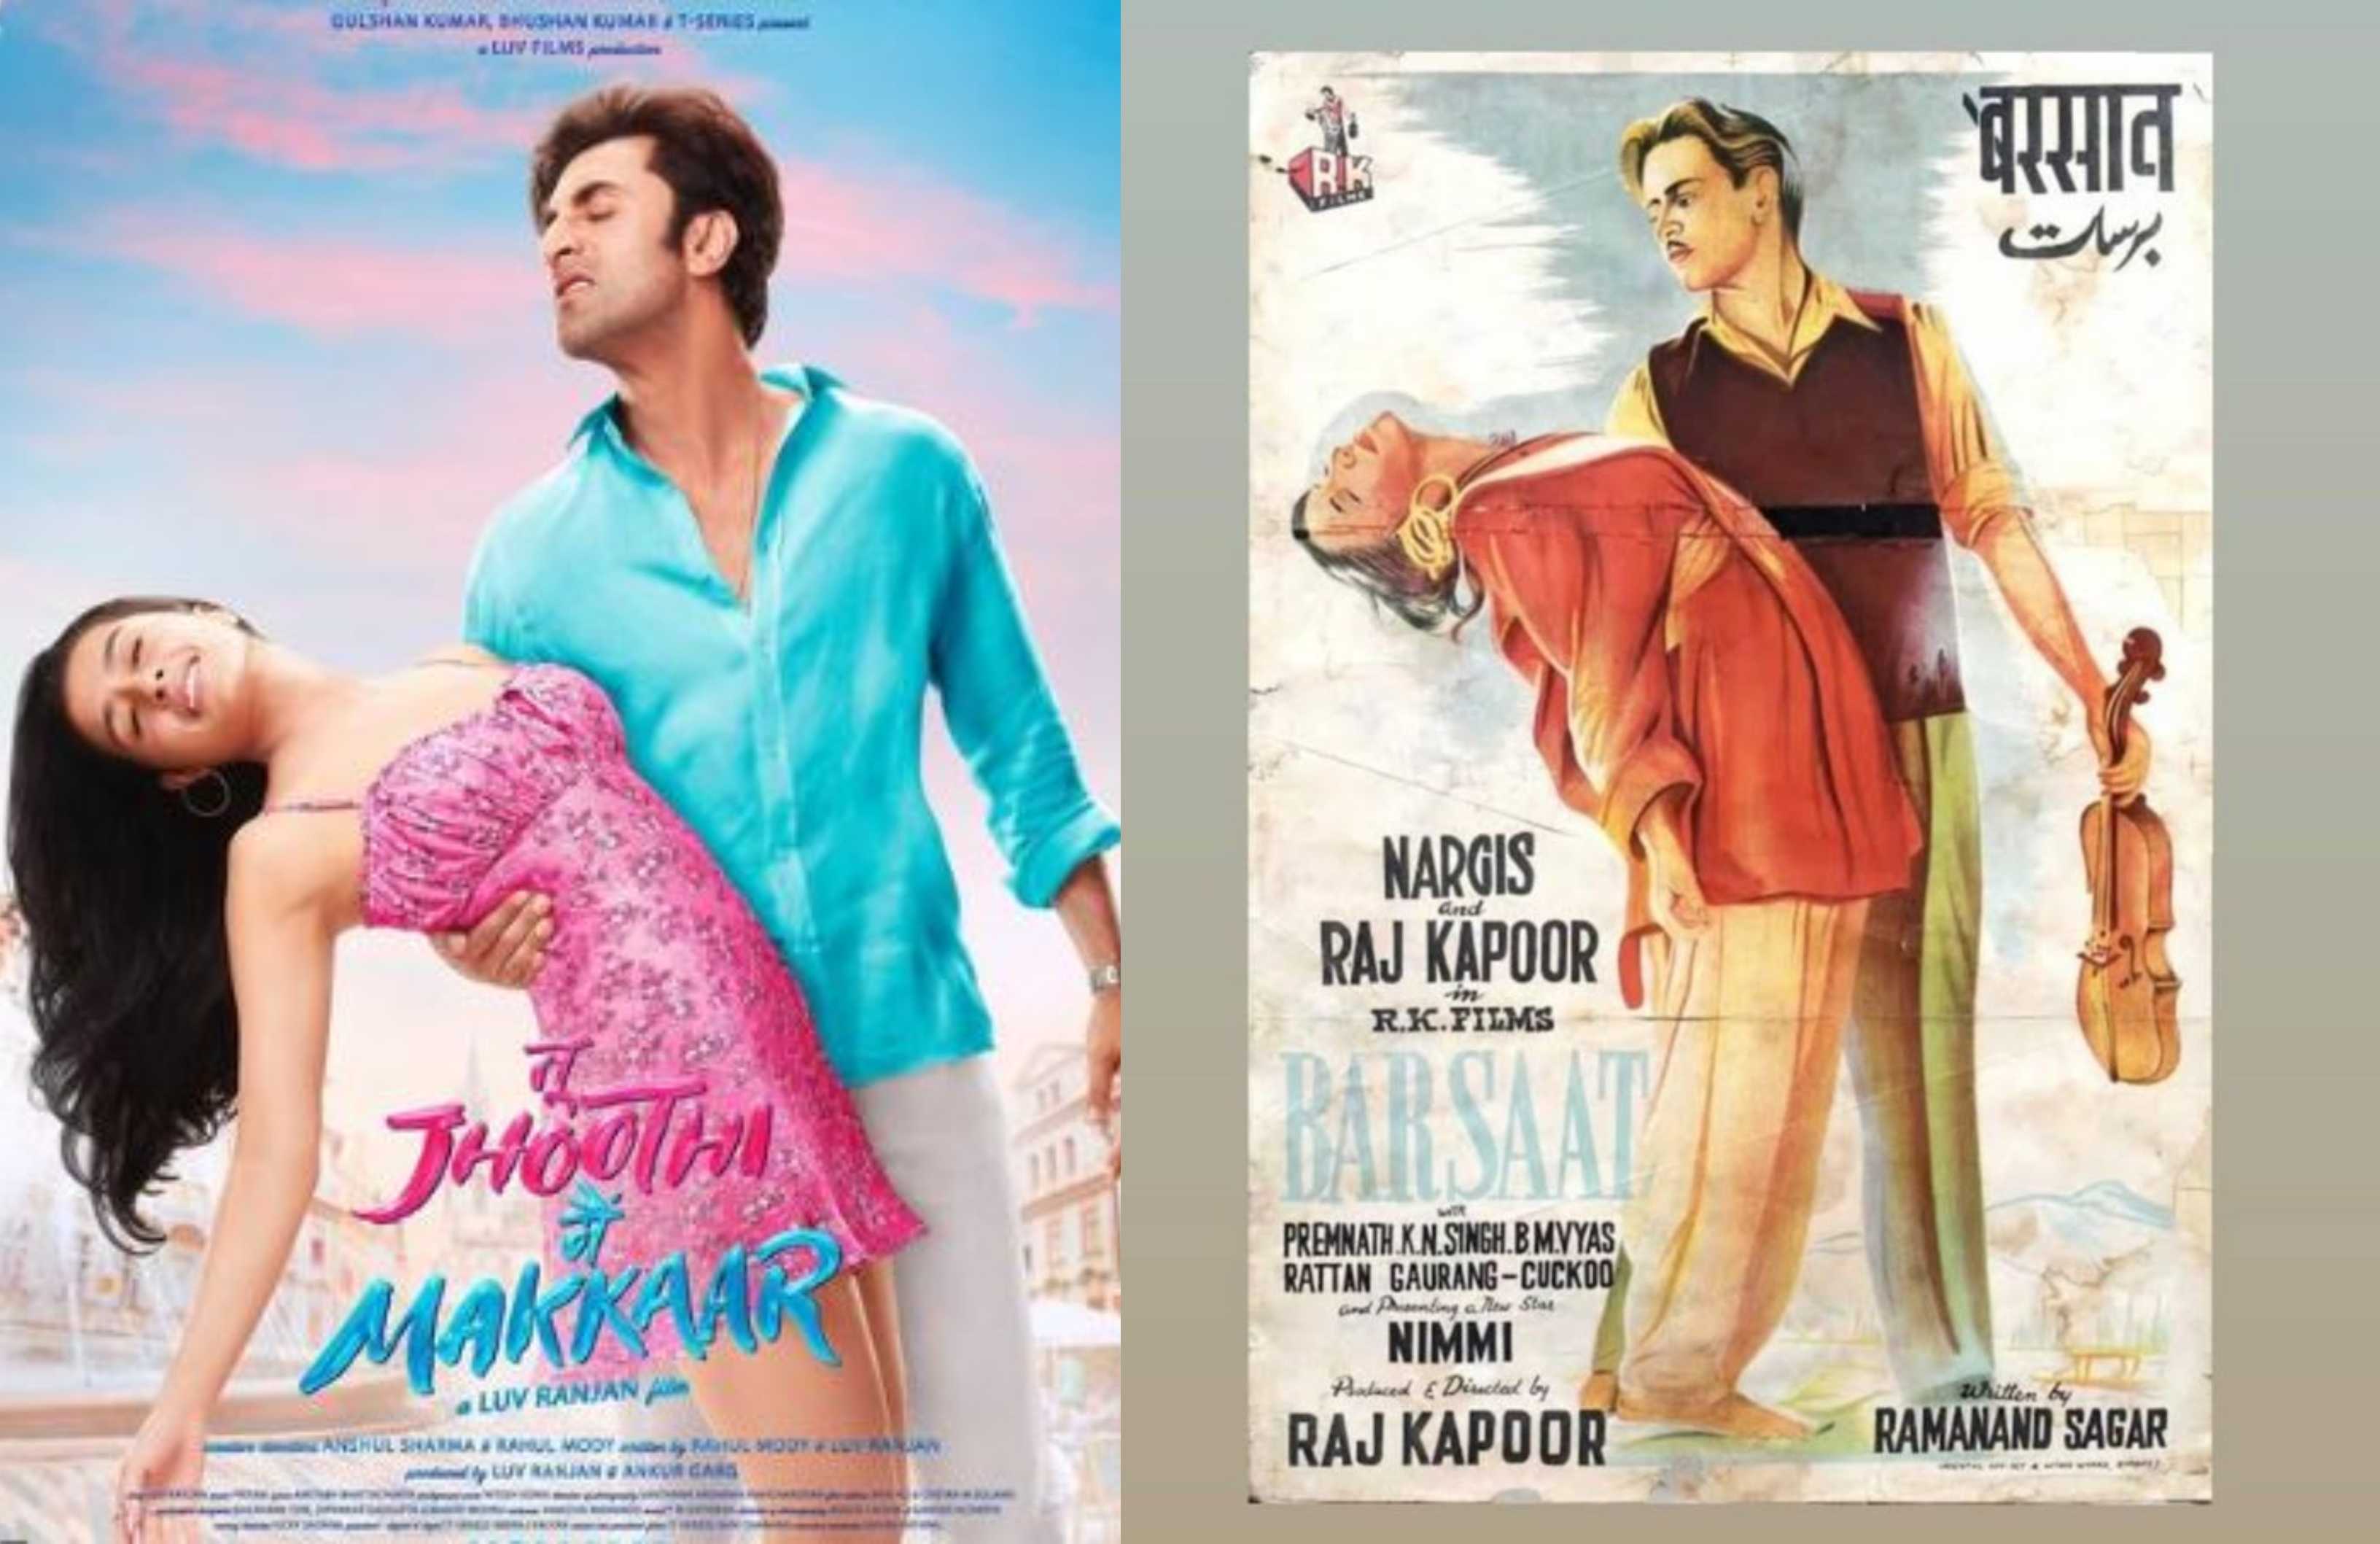 Tu Jhoothi Main Makkar's poster is ripped off from Raj Kapoor's Barsaat, plot to revolve around a fake story? Here's what we know